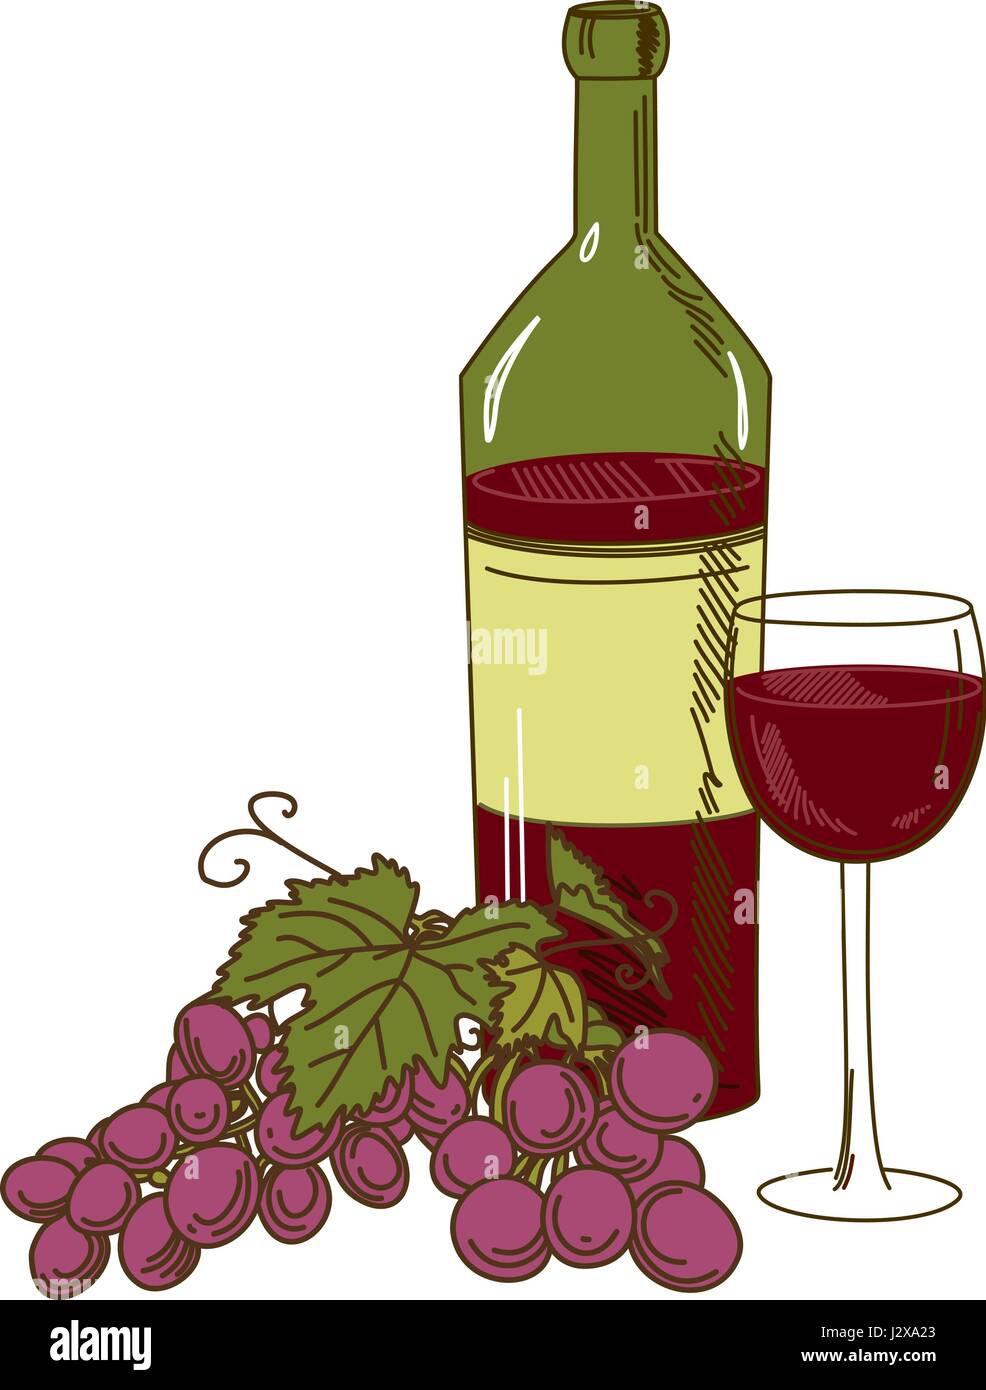 A bottle of wine, grapes and a glass on a white background Stock Vector